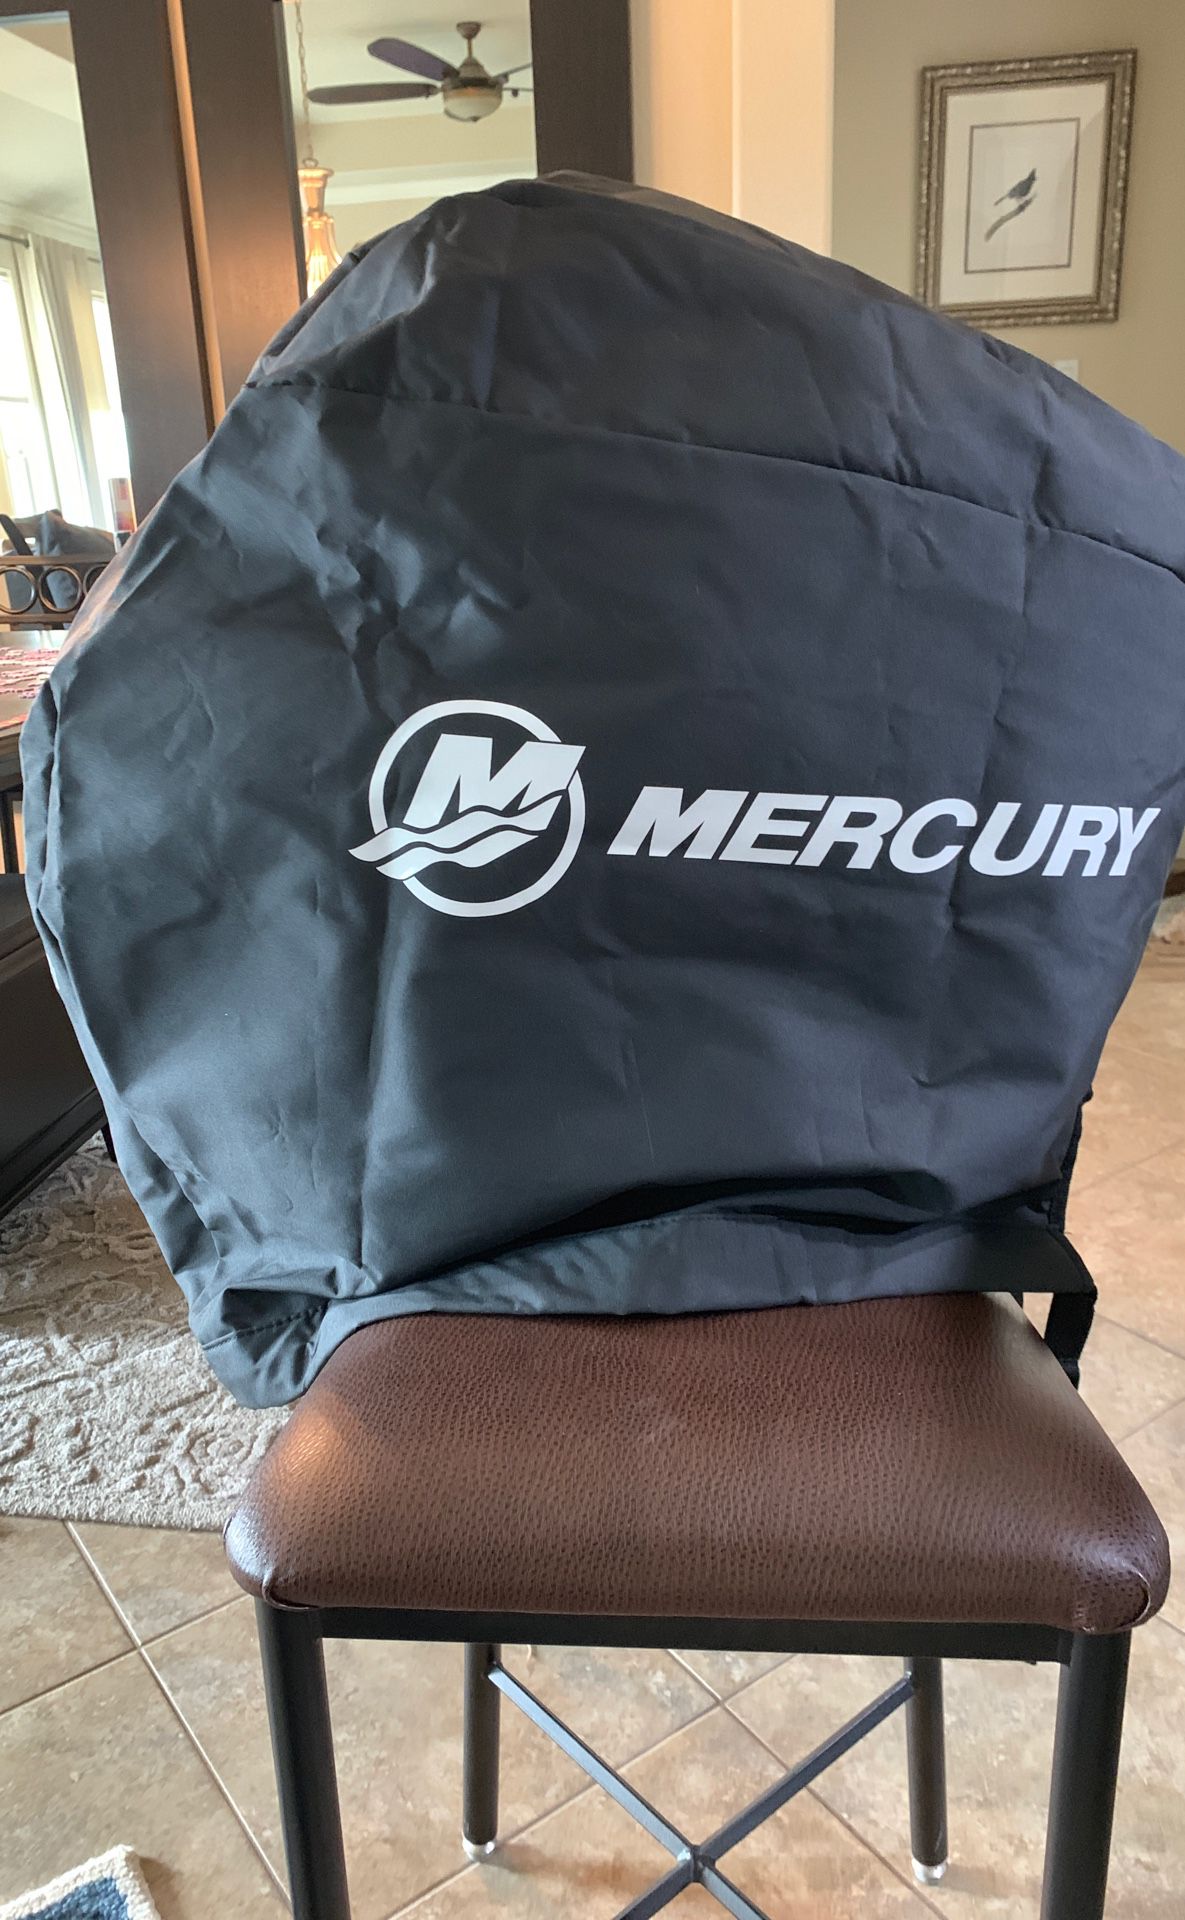 Mercury outboard motor cover